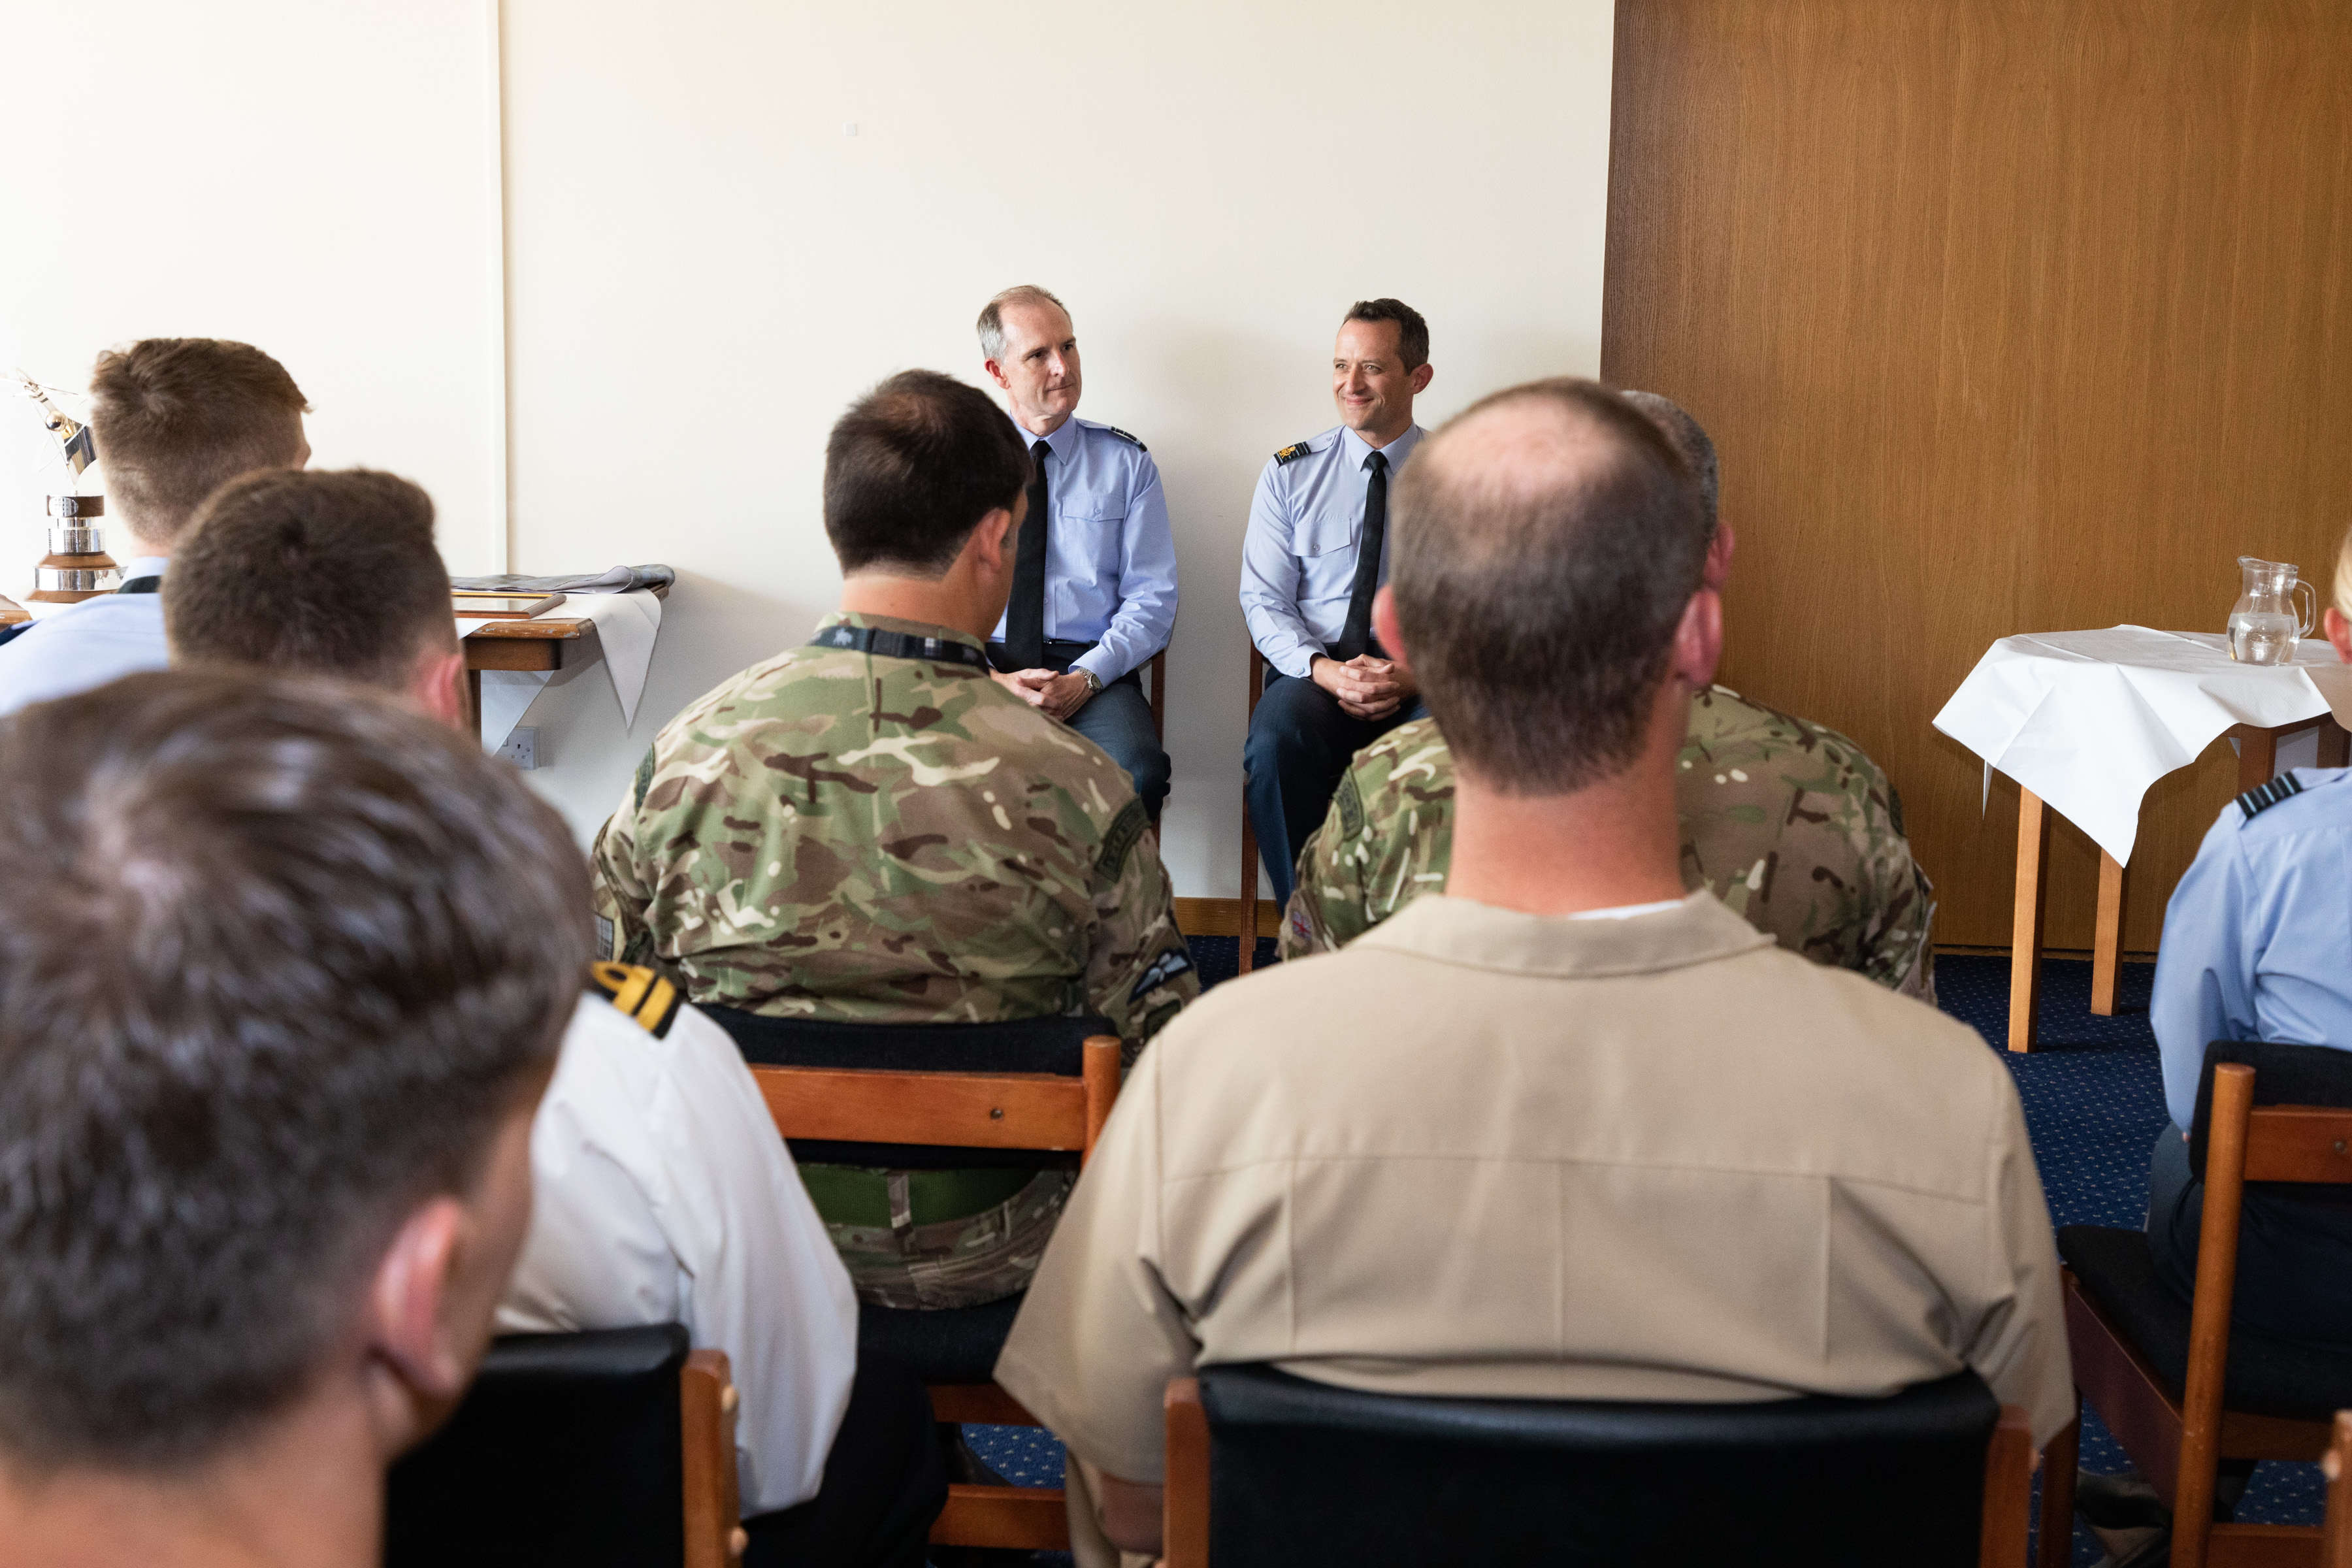 Image shows personnel sitting in the presentation room.